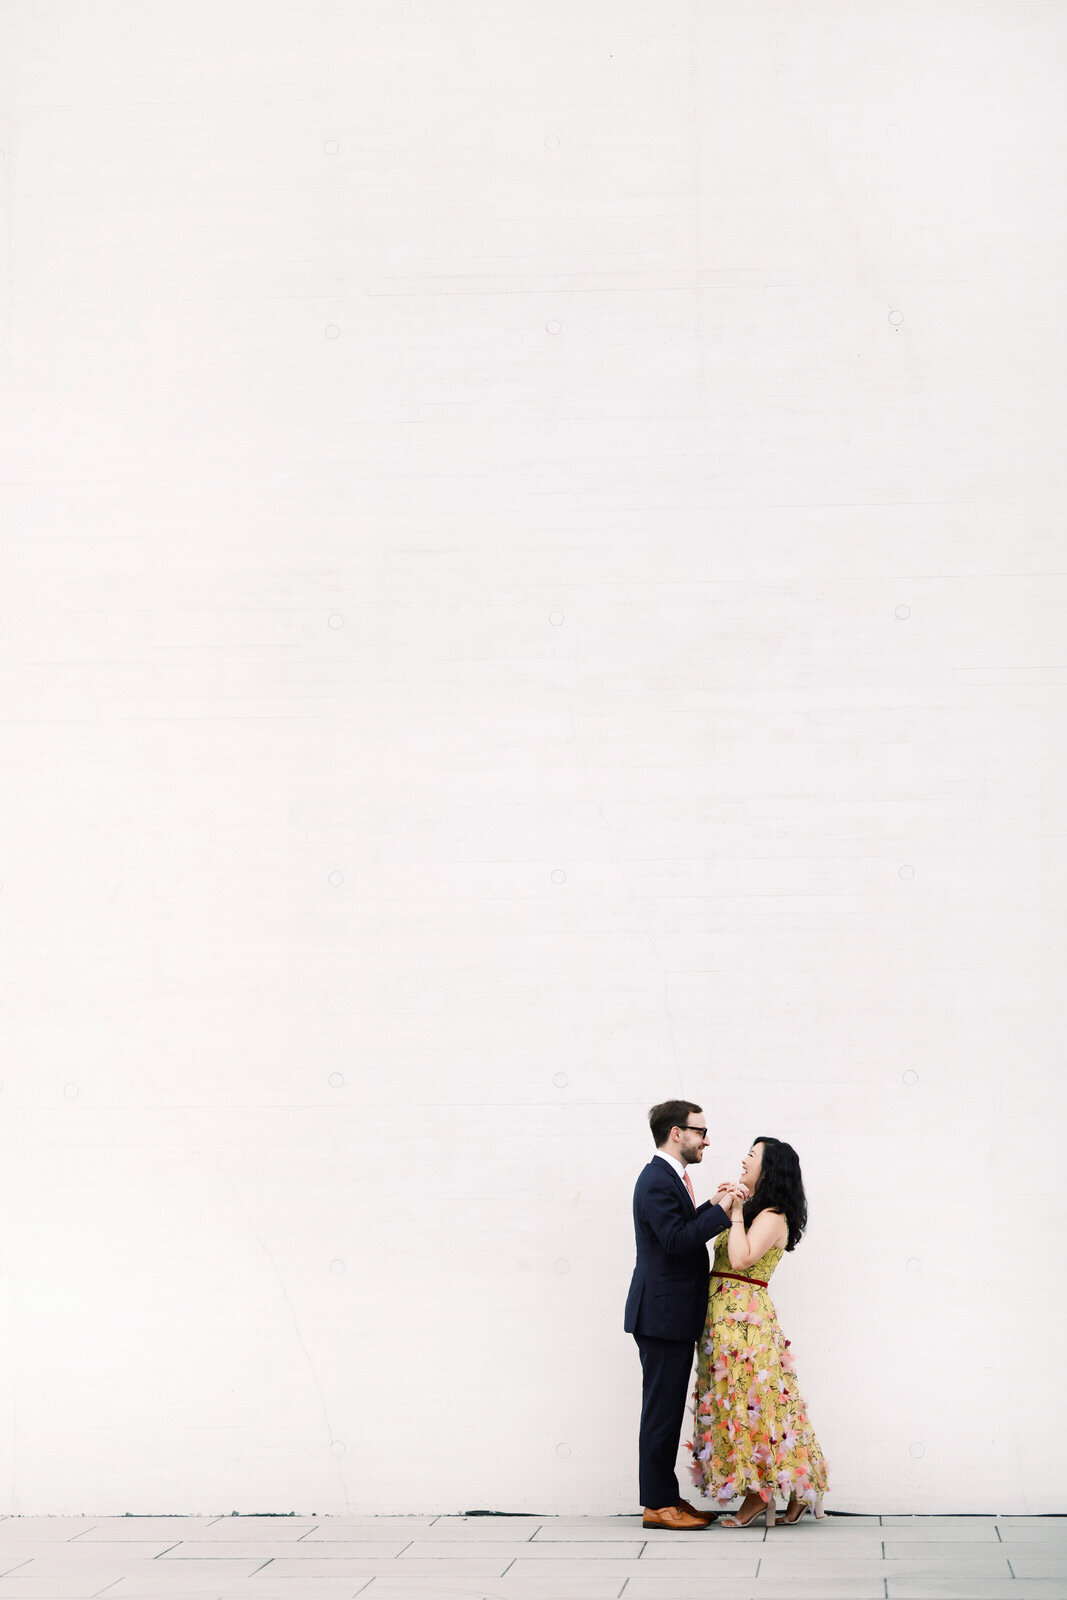 DC wedding photographer photographs a stylish couple during a modern engagement session at the Kennedy Center.